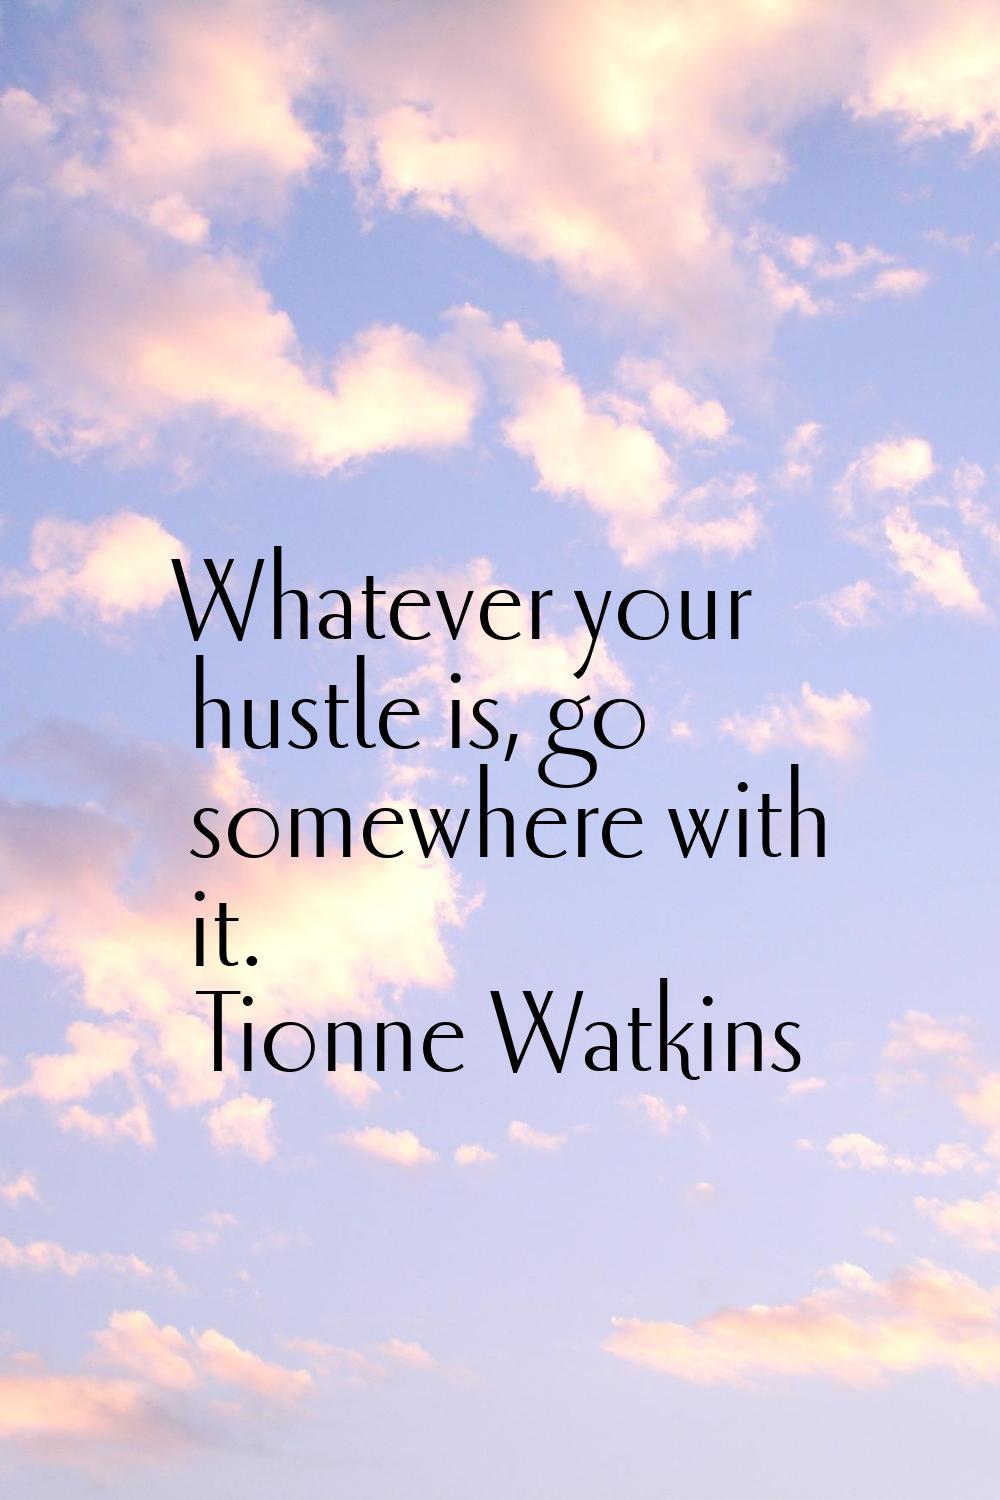 Whatever your hustle is, go somewhere with it.